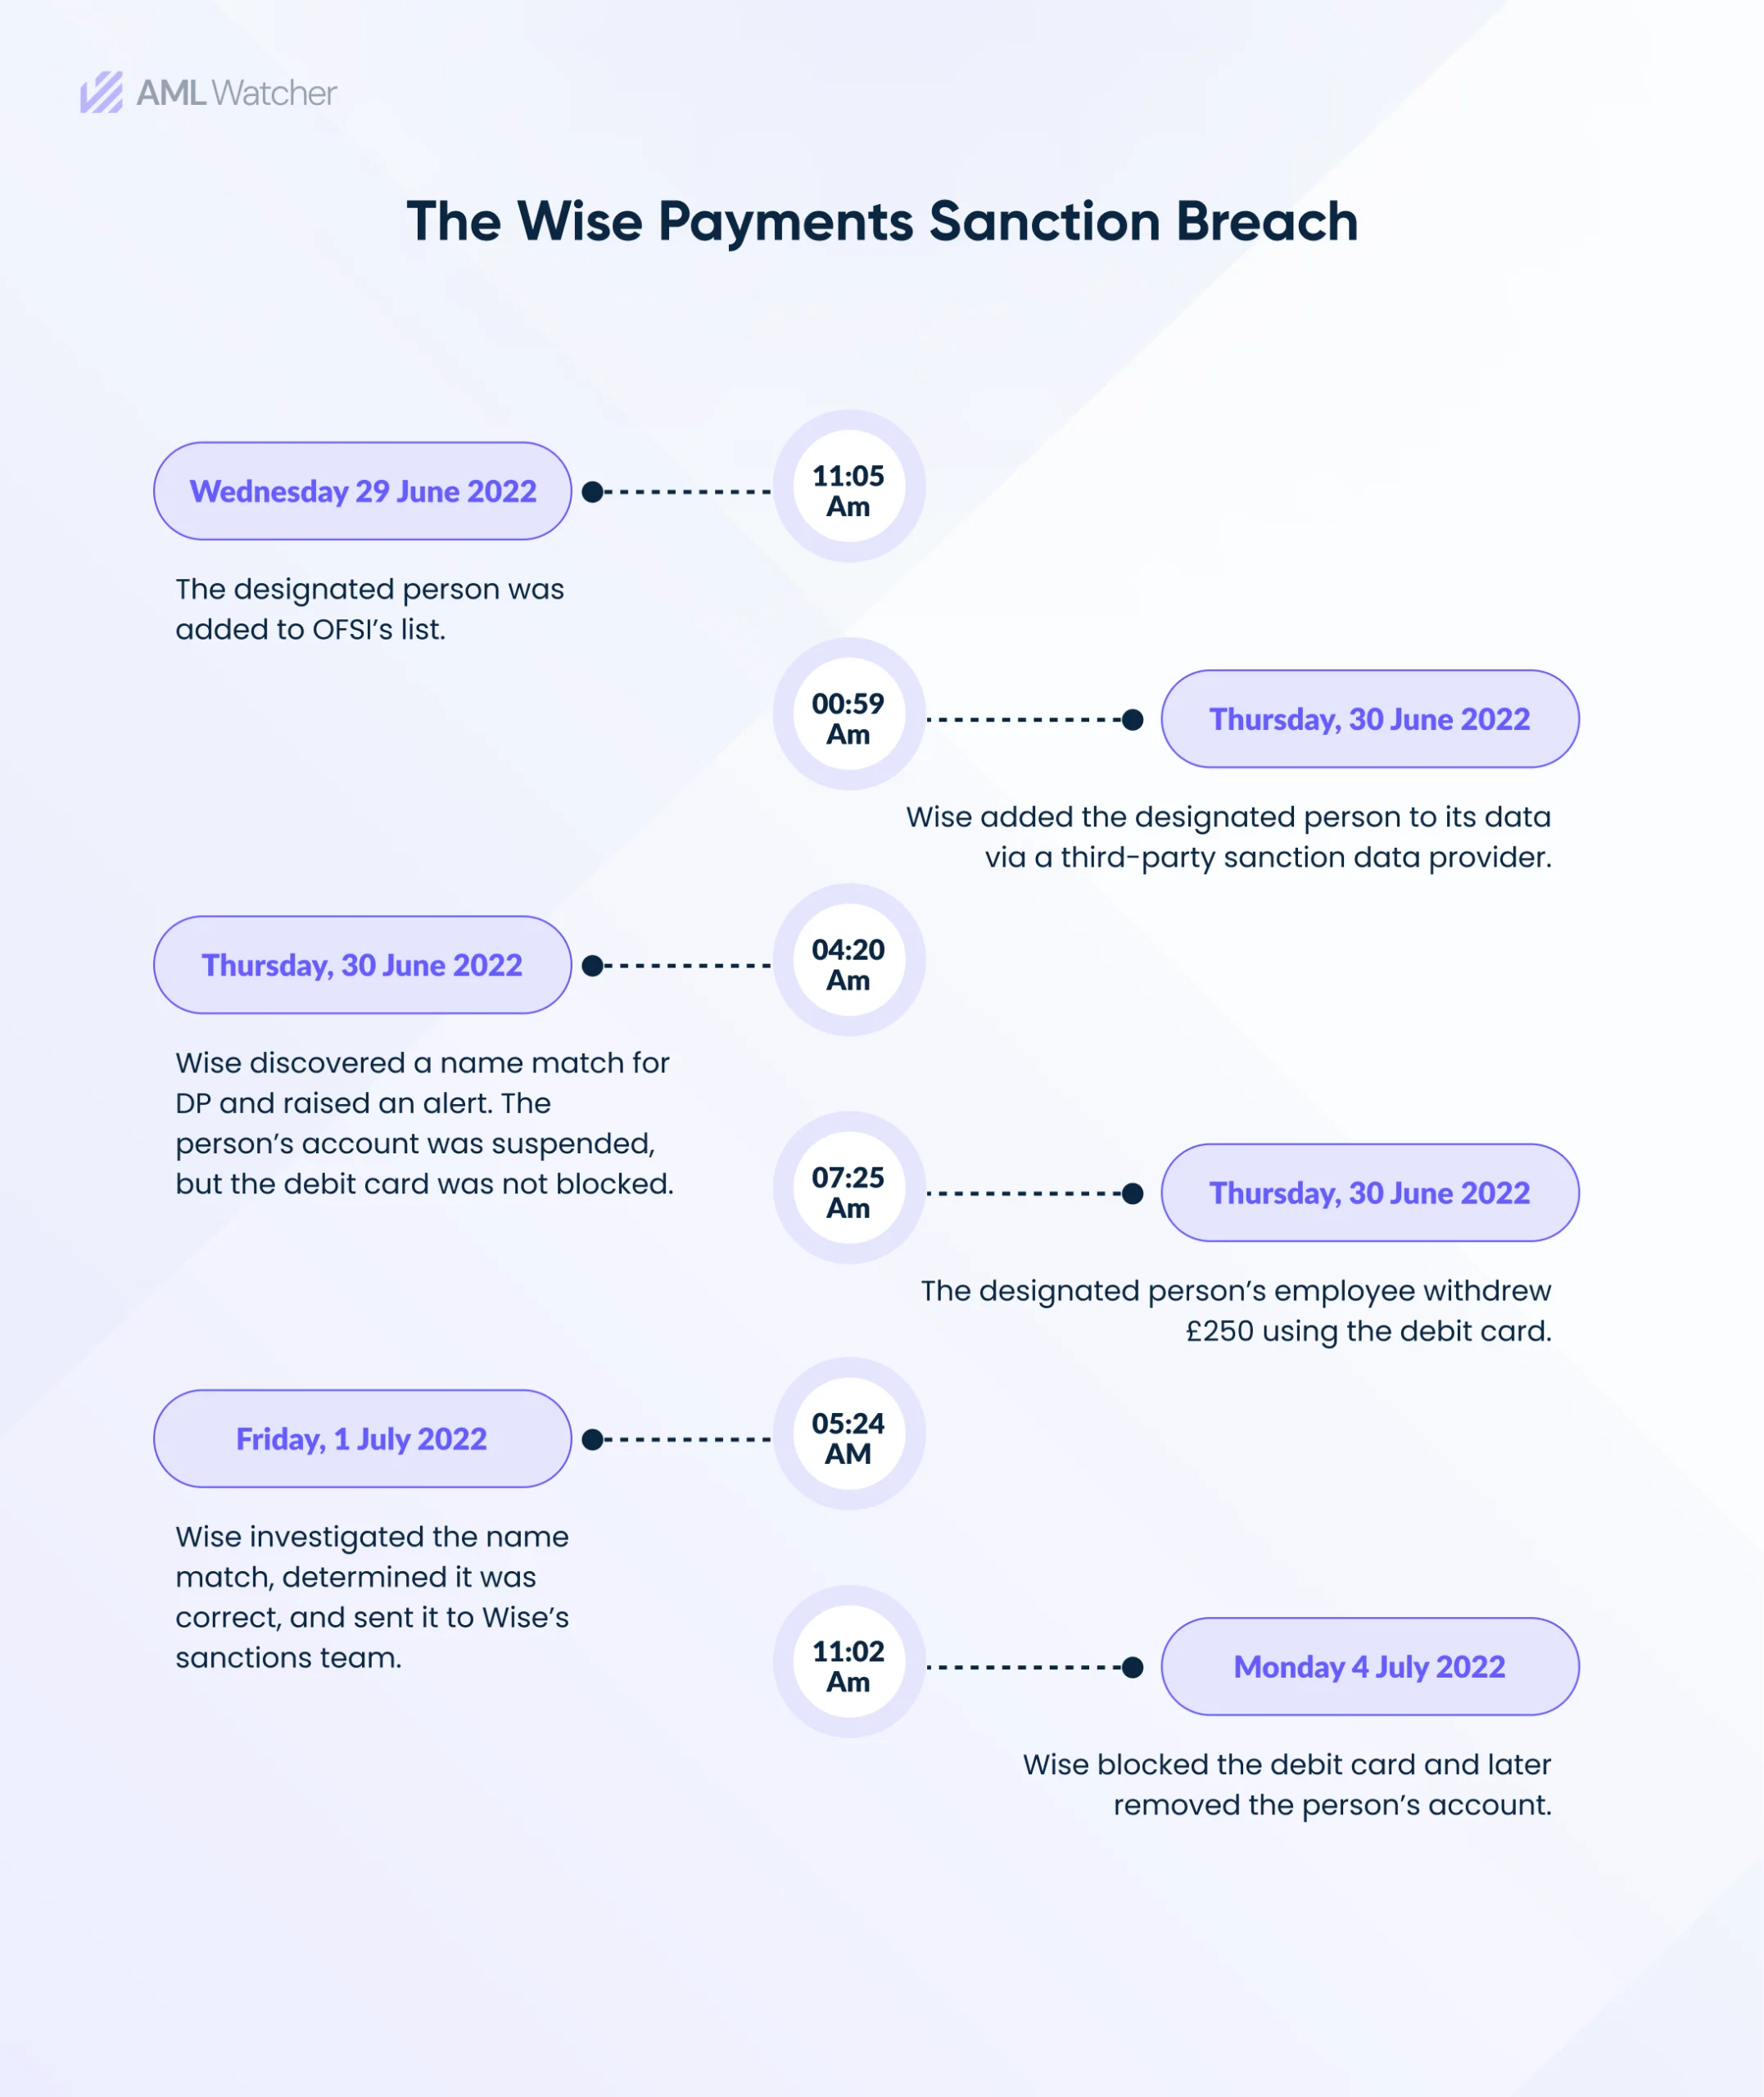 This image shows the timeline of the Wise AML Breach 